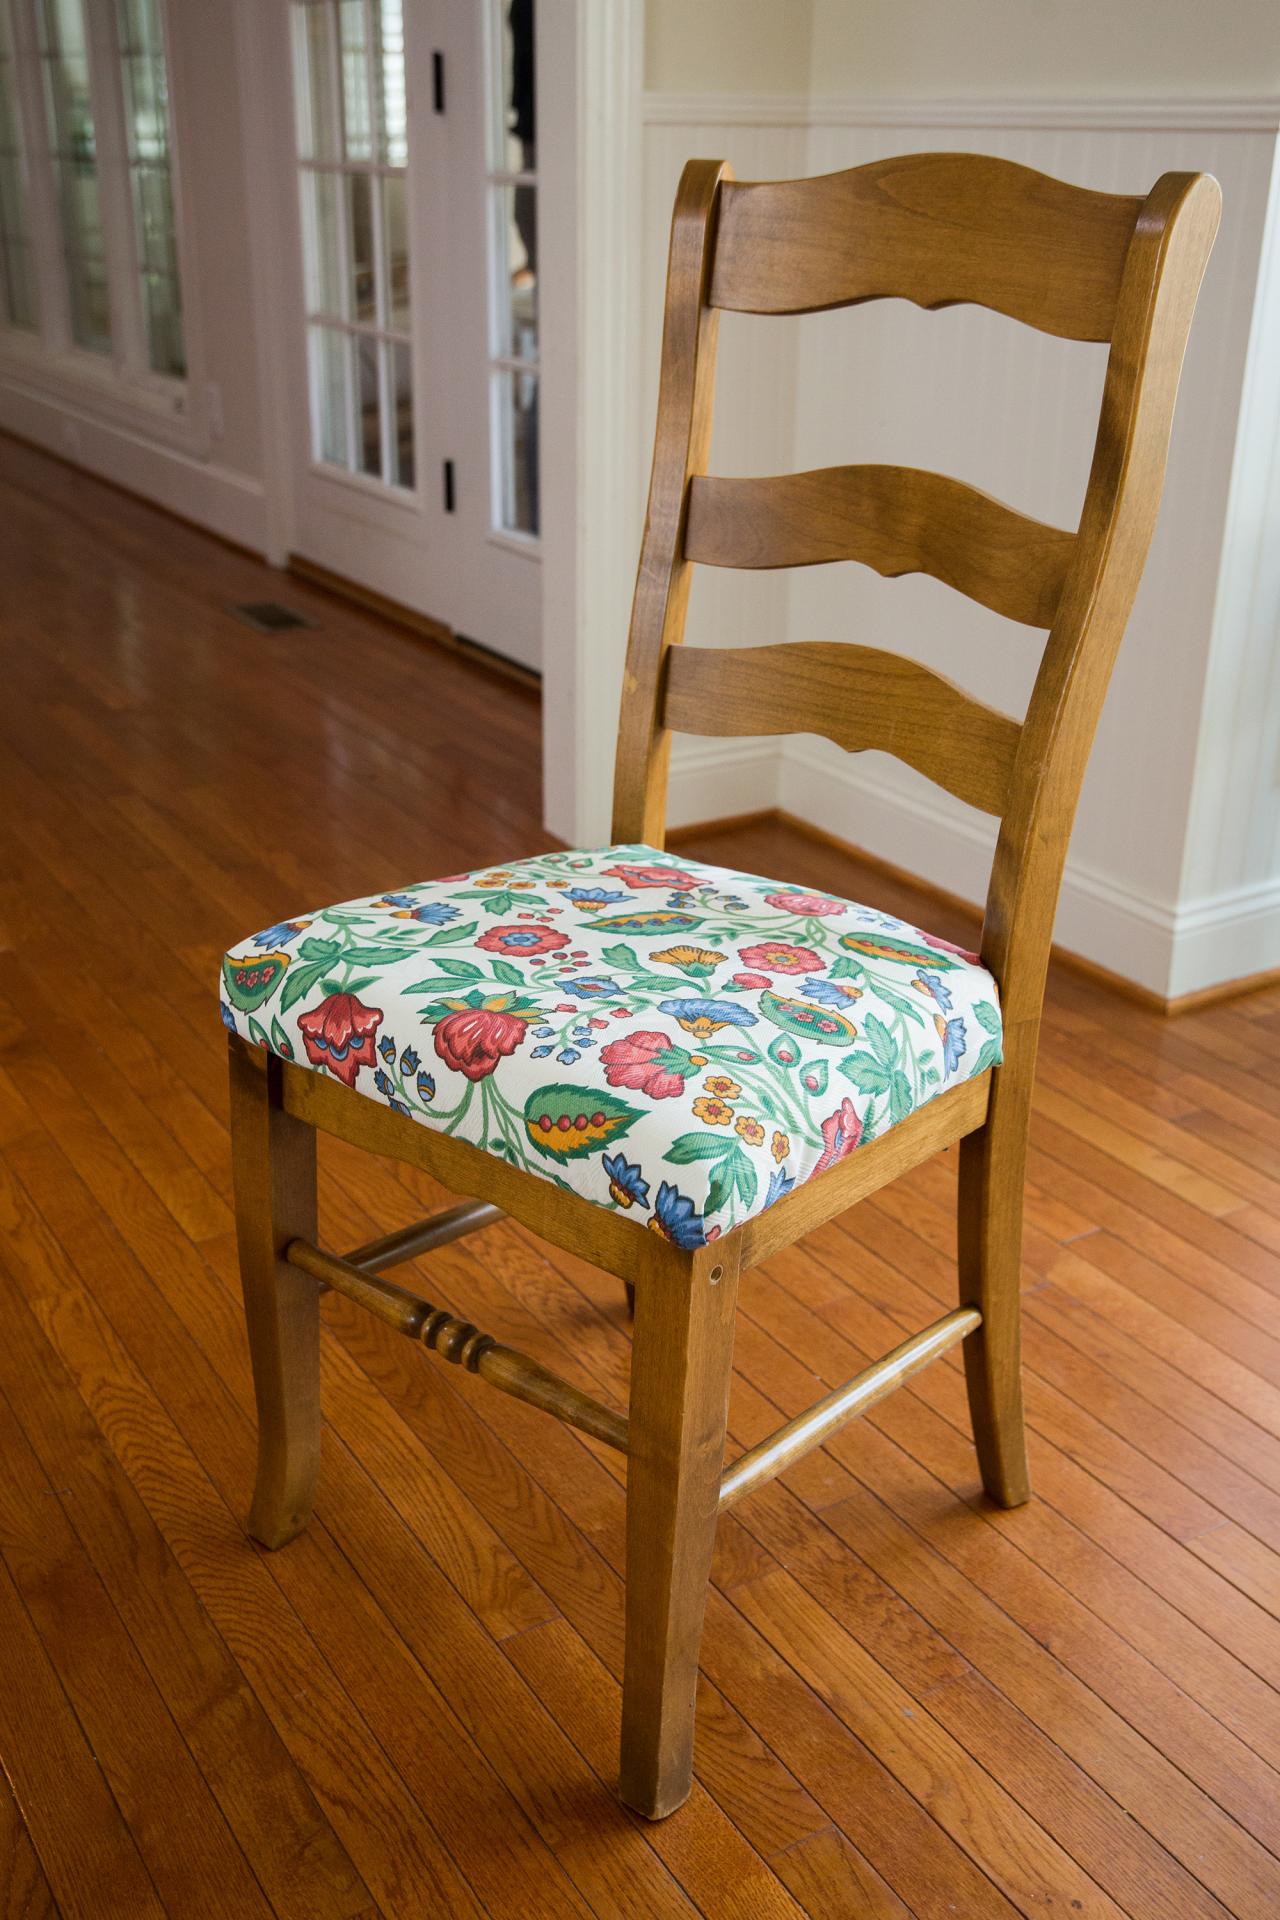 How To Re Cover A Dining Room Chair, How To Reupholster A Dining Chair Cushion With Piping